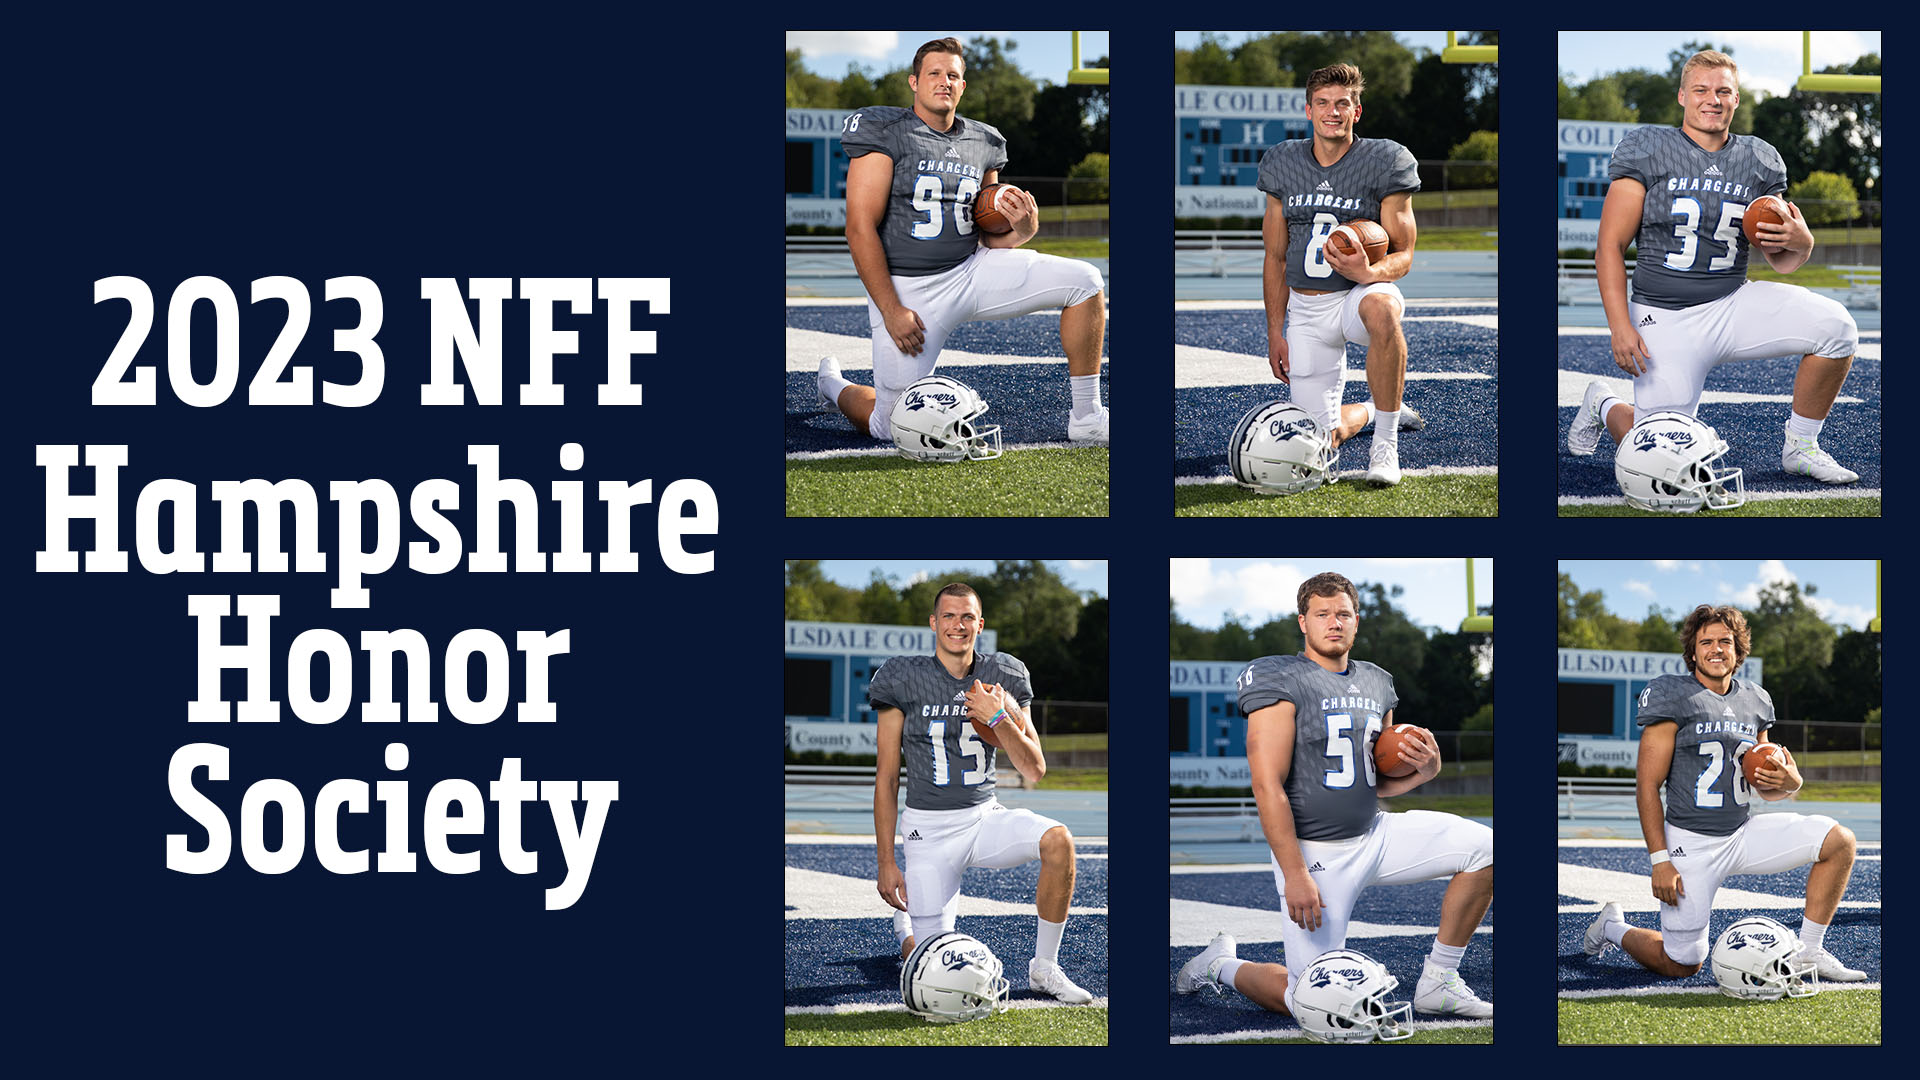 Six Chargers football athletes inducted into NFF Hampshire Honor Society for 2023